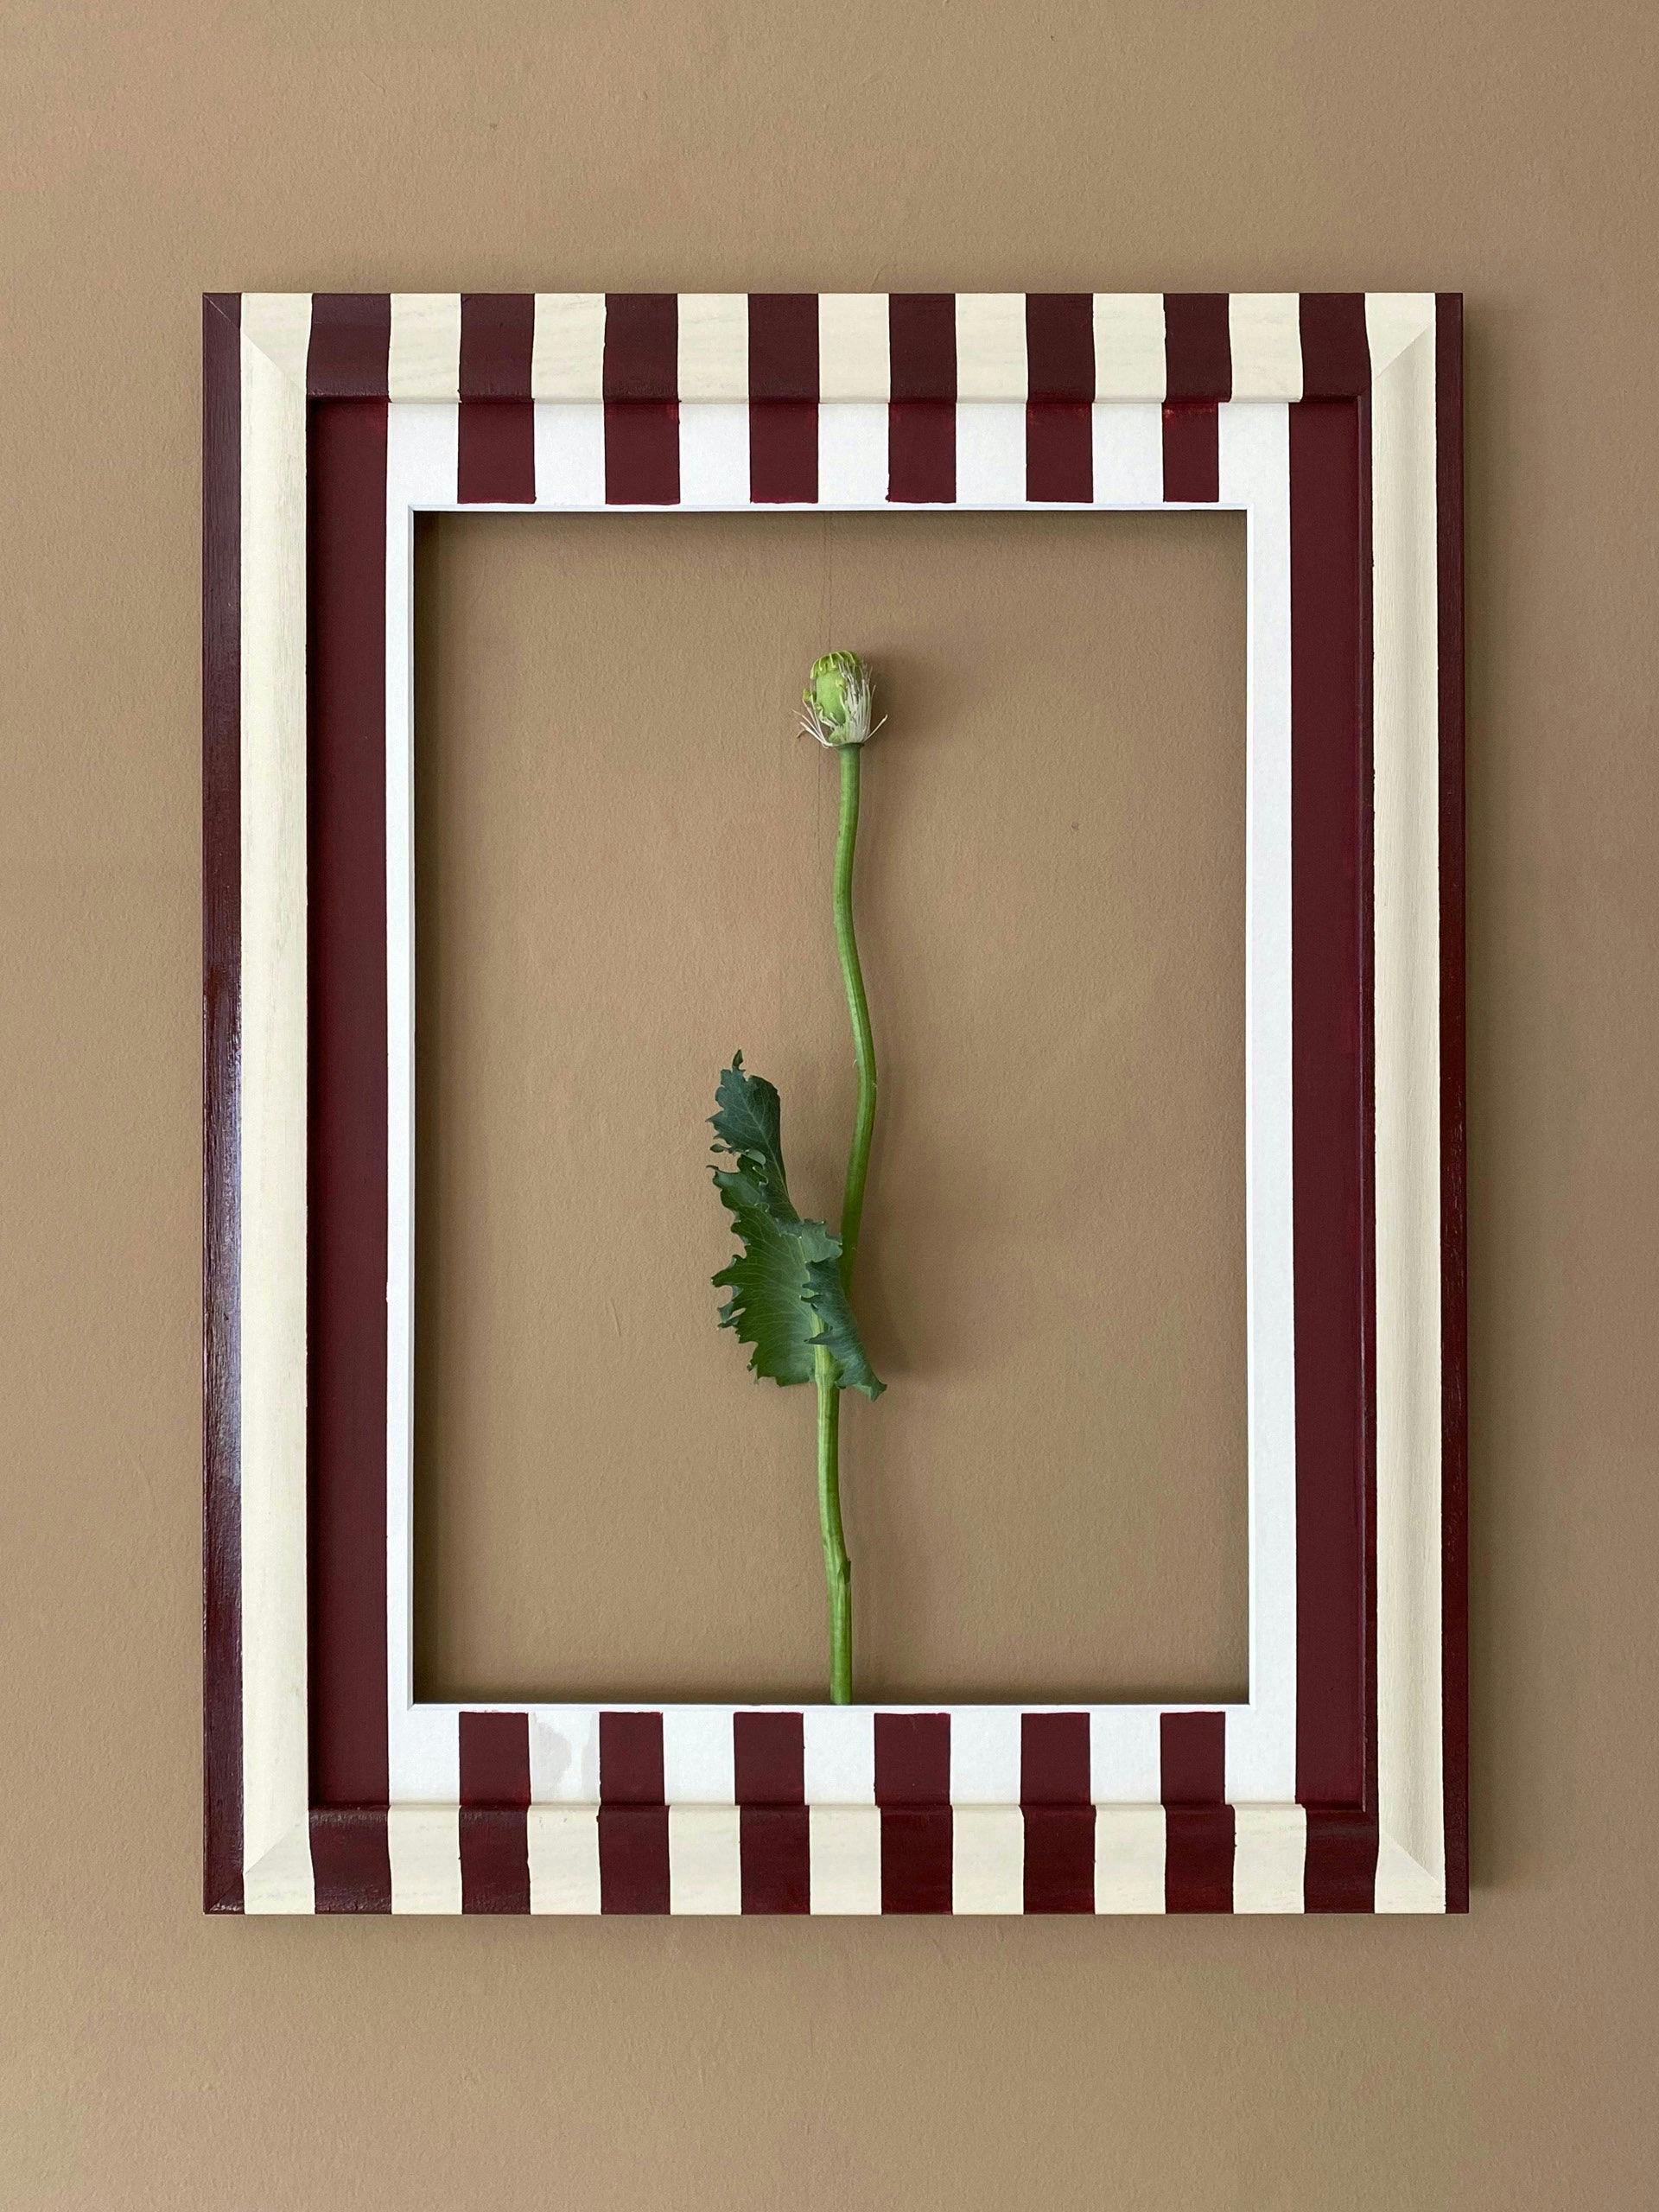 Hand-painted wooden frame